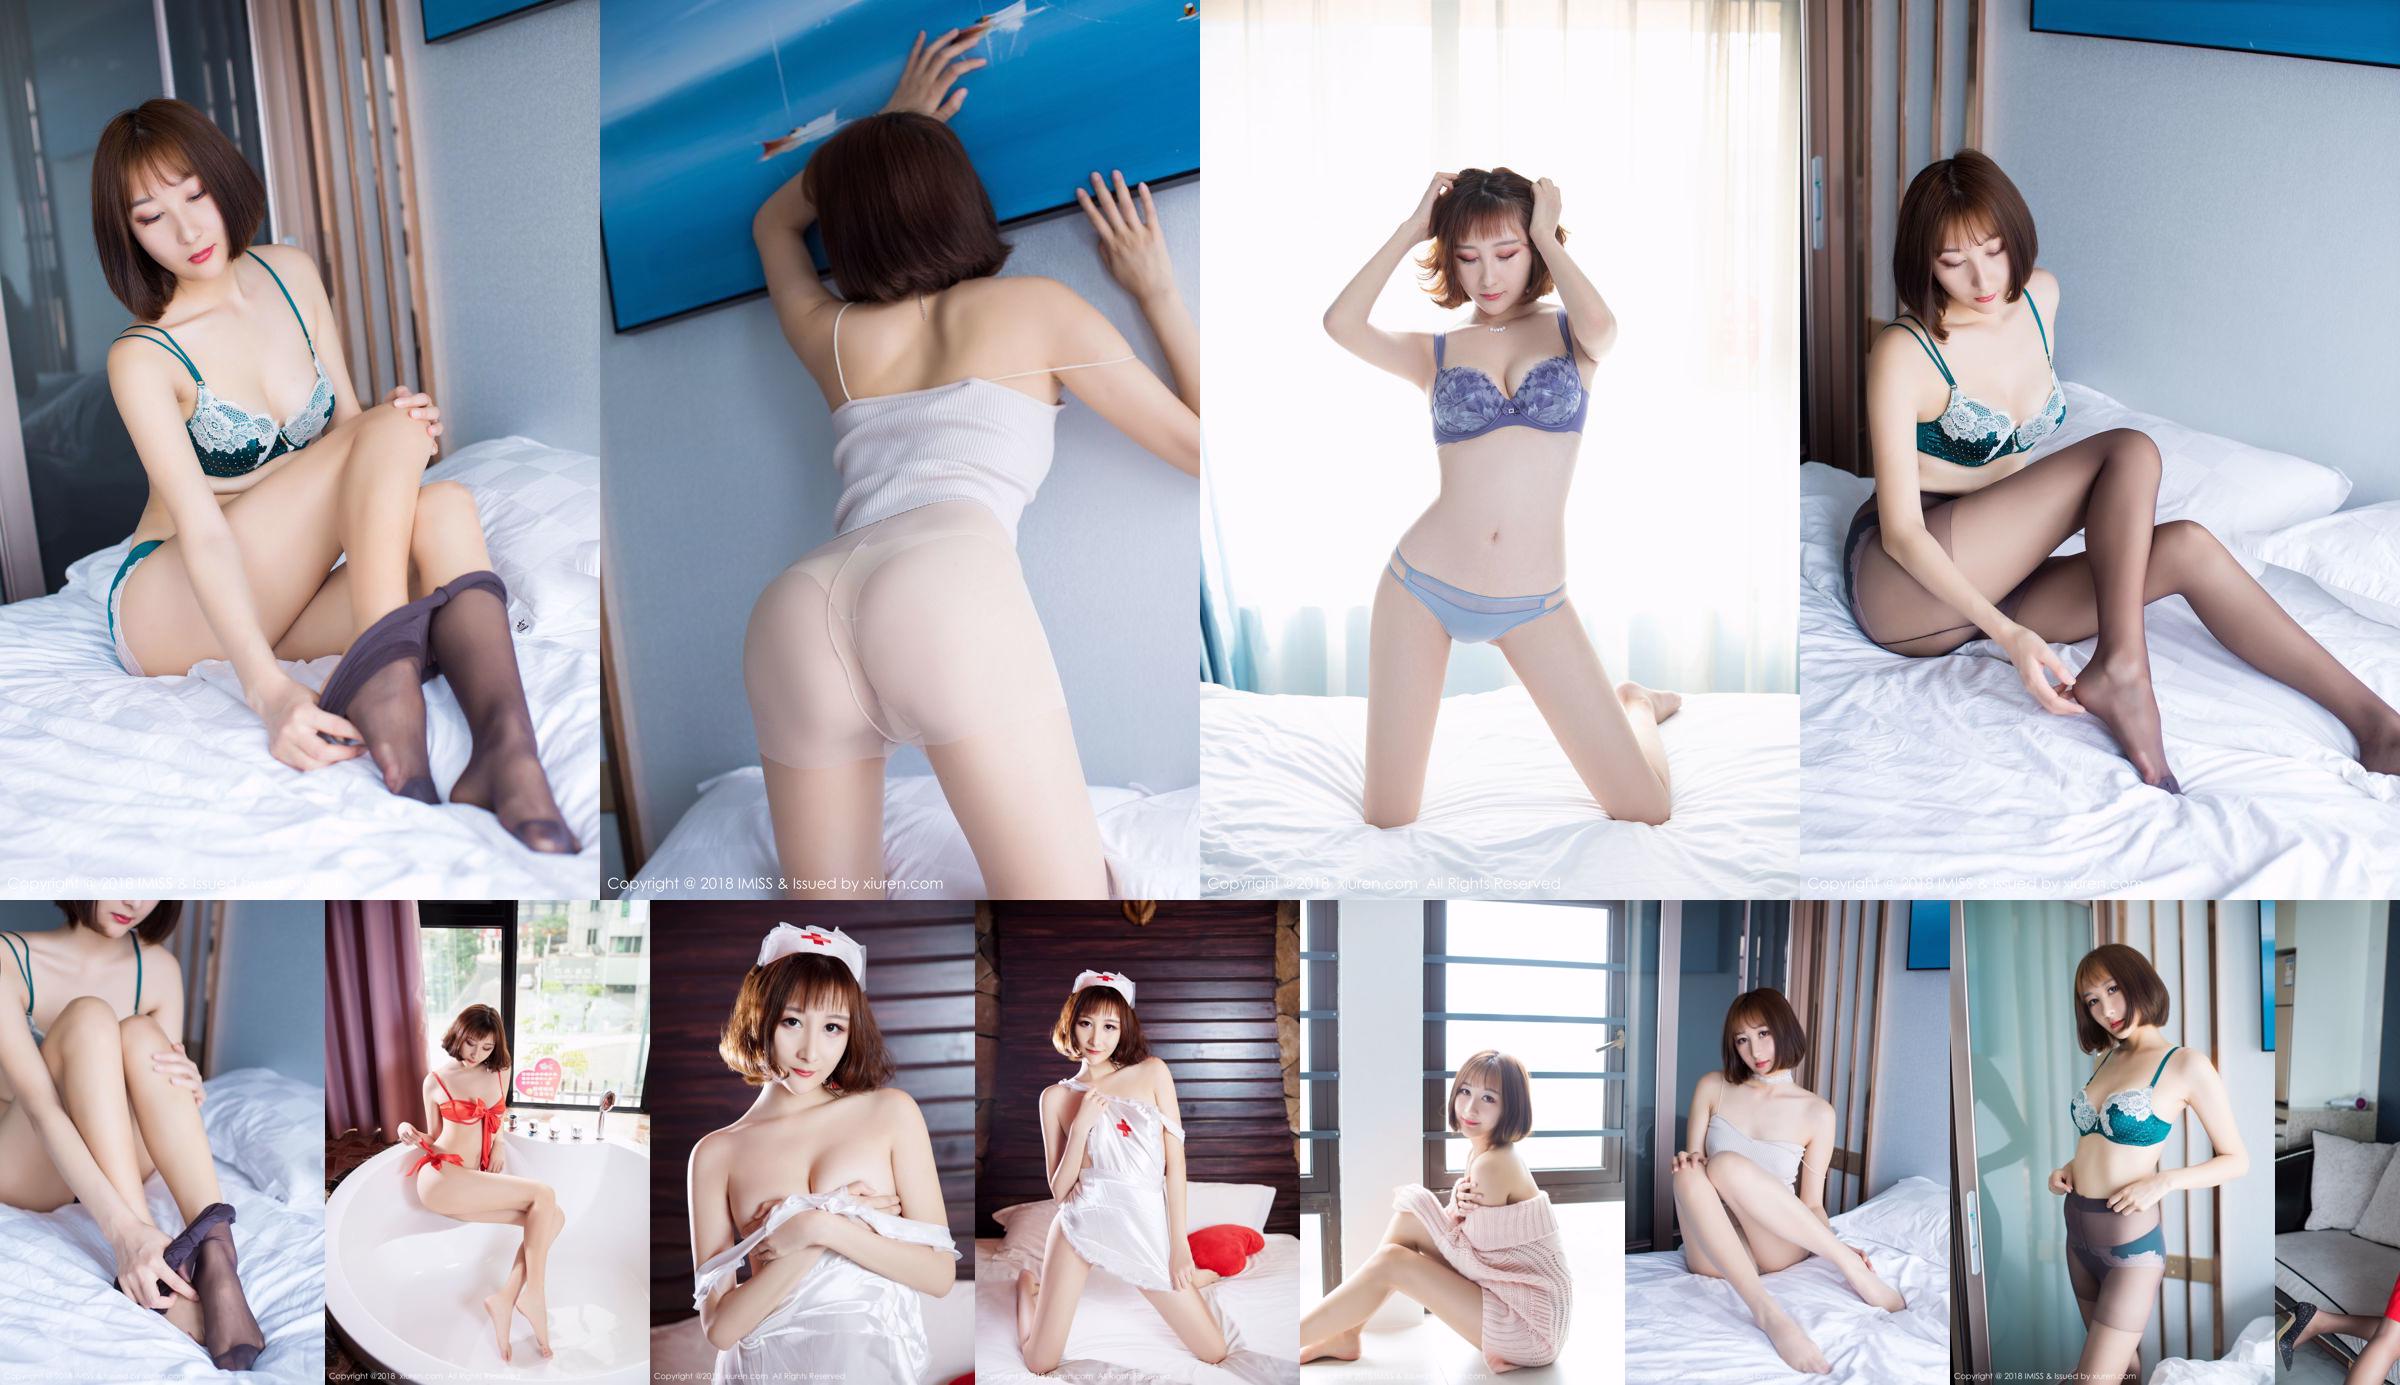 Modèle @ 九尾 Ivy- "The Ultimate Private Charm" [秀 人 XIUREN] No.1046 No.cf1449 Page 1